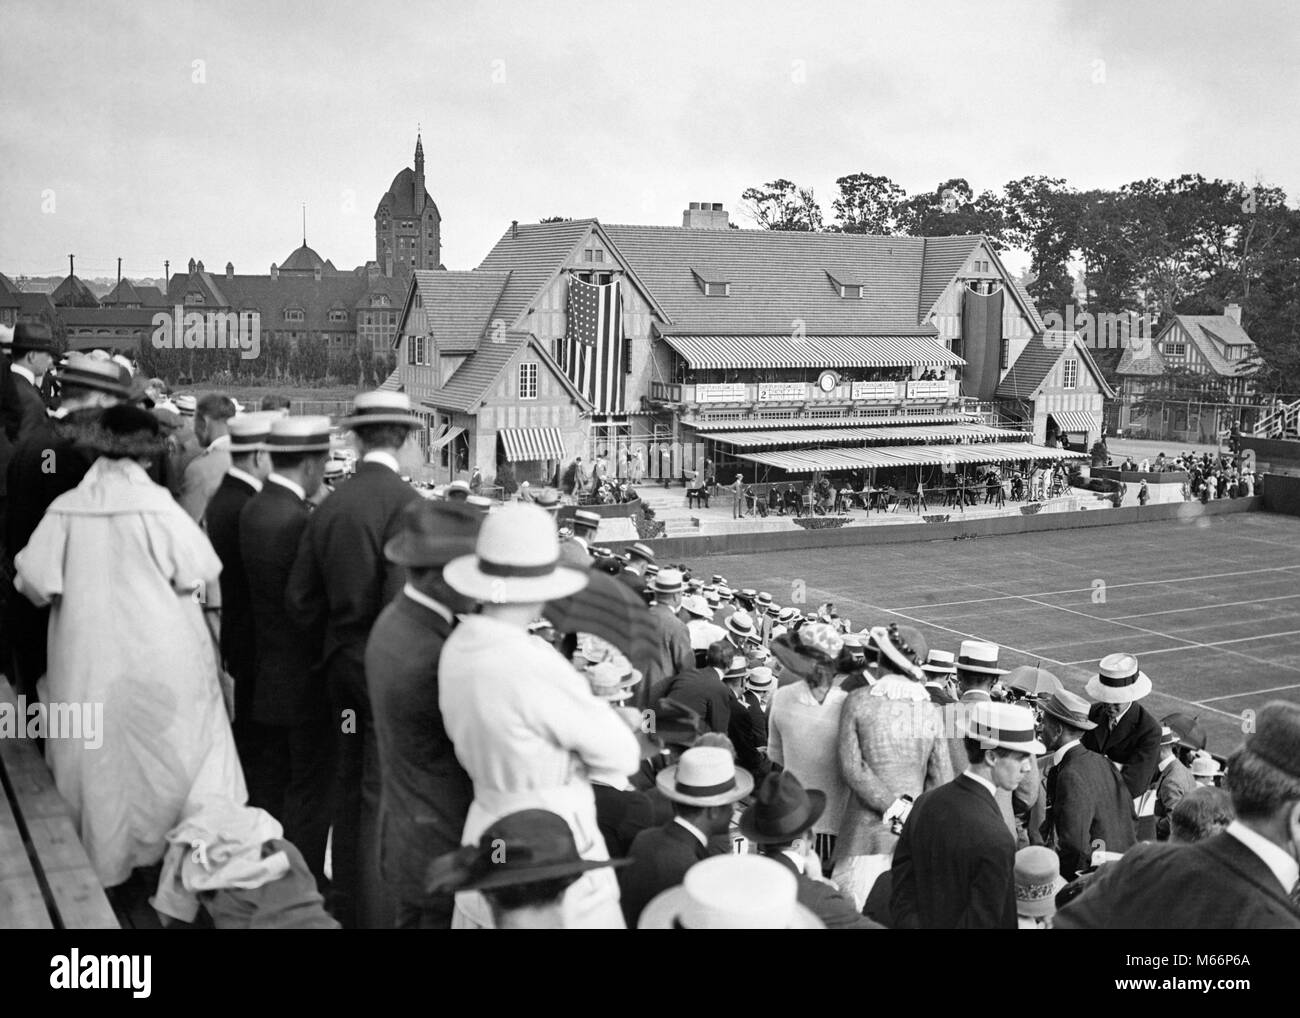 1910s 1916 DAVIS CUP TENNIS MATCH AT THE FOREST HILLS TENNIS CLUB LONG ISLAND NEW YORK USA - q45902 CPC001 HARS BUILDINGS NOSTALGIA SPECTATORS NORTH AMERICA WIDE ANGLE HIGH ANGLE PROPERTY EXCITEMENT EXTERIOR RECREATION NYC PROFESSIONAL SPORTS REAL ESTATE NEW YORK STRUCTURES 1910s BLEACHERS CITIES EDIFICE MEN'S NEW YORK CITY STANDS BOROUGH FANS MALES 1916 B&W BLACK AND WHITE DAVIS FOREST HILLS INTERNATIONAL OLD FASHIONED PERSONS SPORTS EVENT TEAM EVENT VENUE Stock Photo